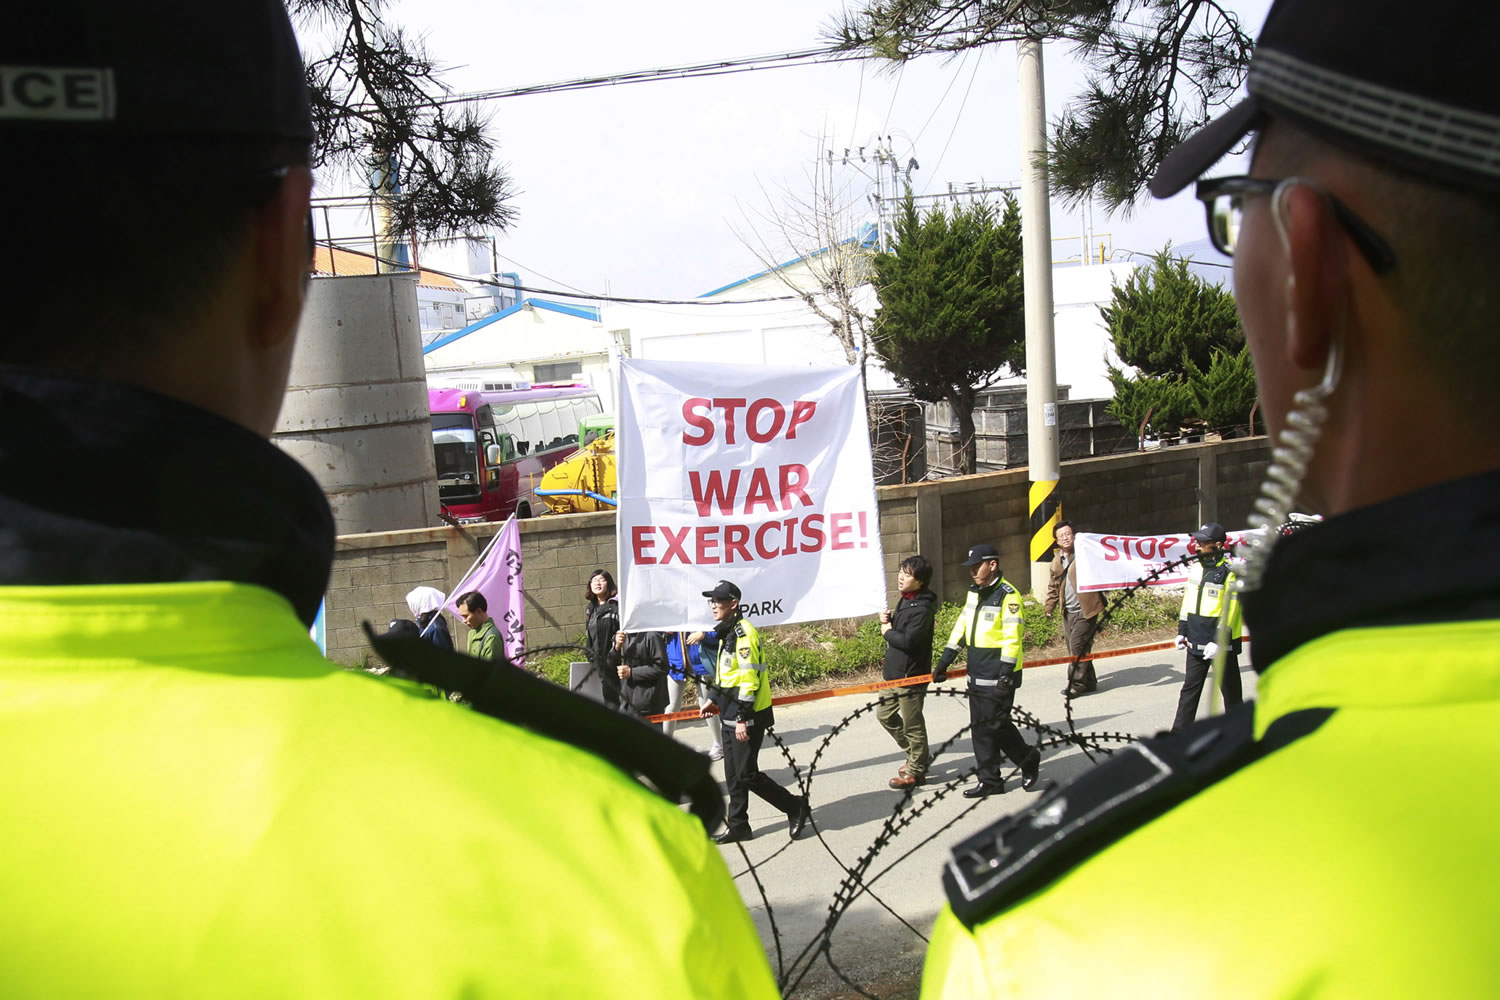 Anti-war protesters march during the U.S.-South Korea joint landing exercises called Ssangyong as part of the Foal Eagle military exercises in Pohang, South Korea, on Monday.